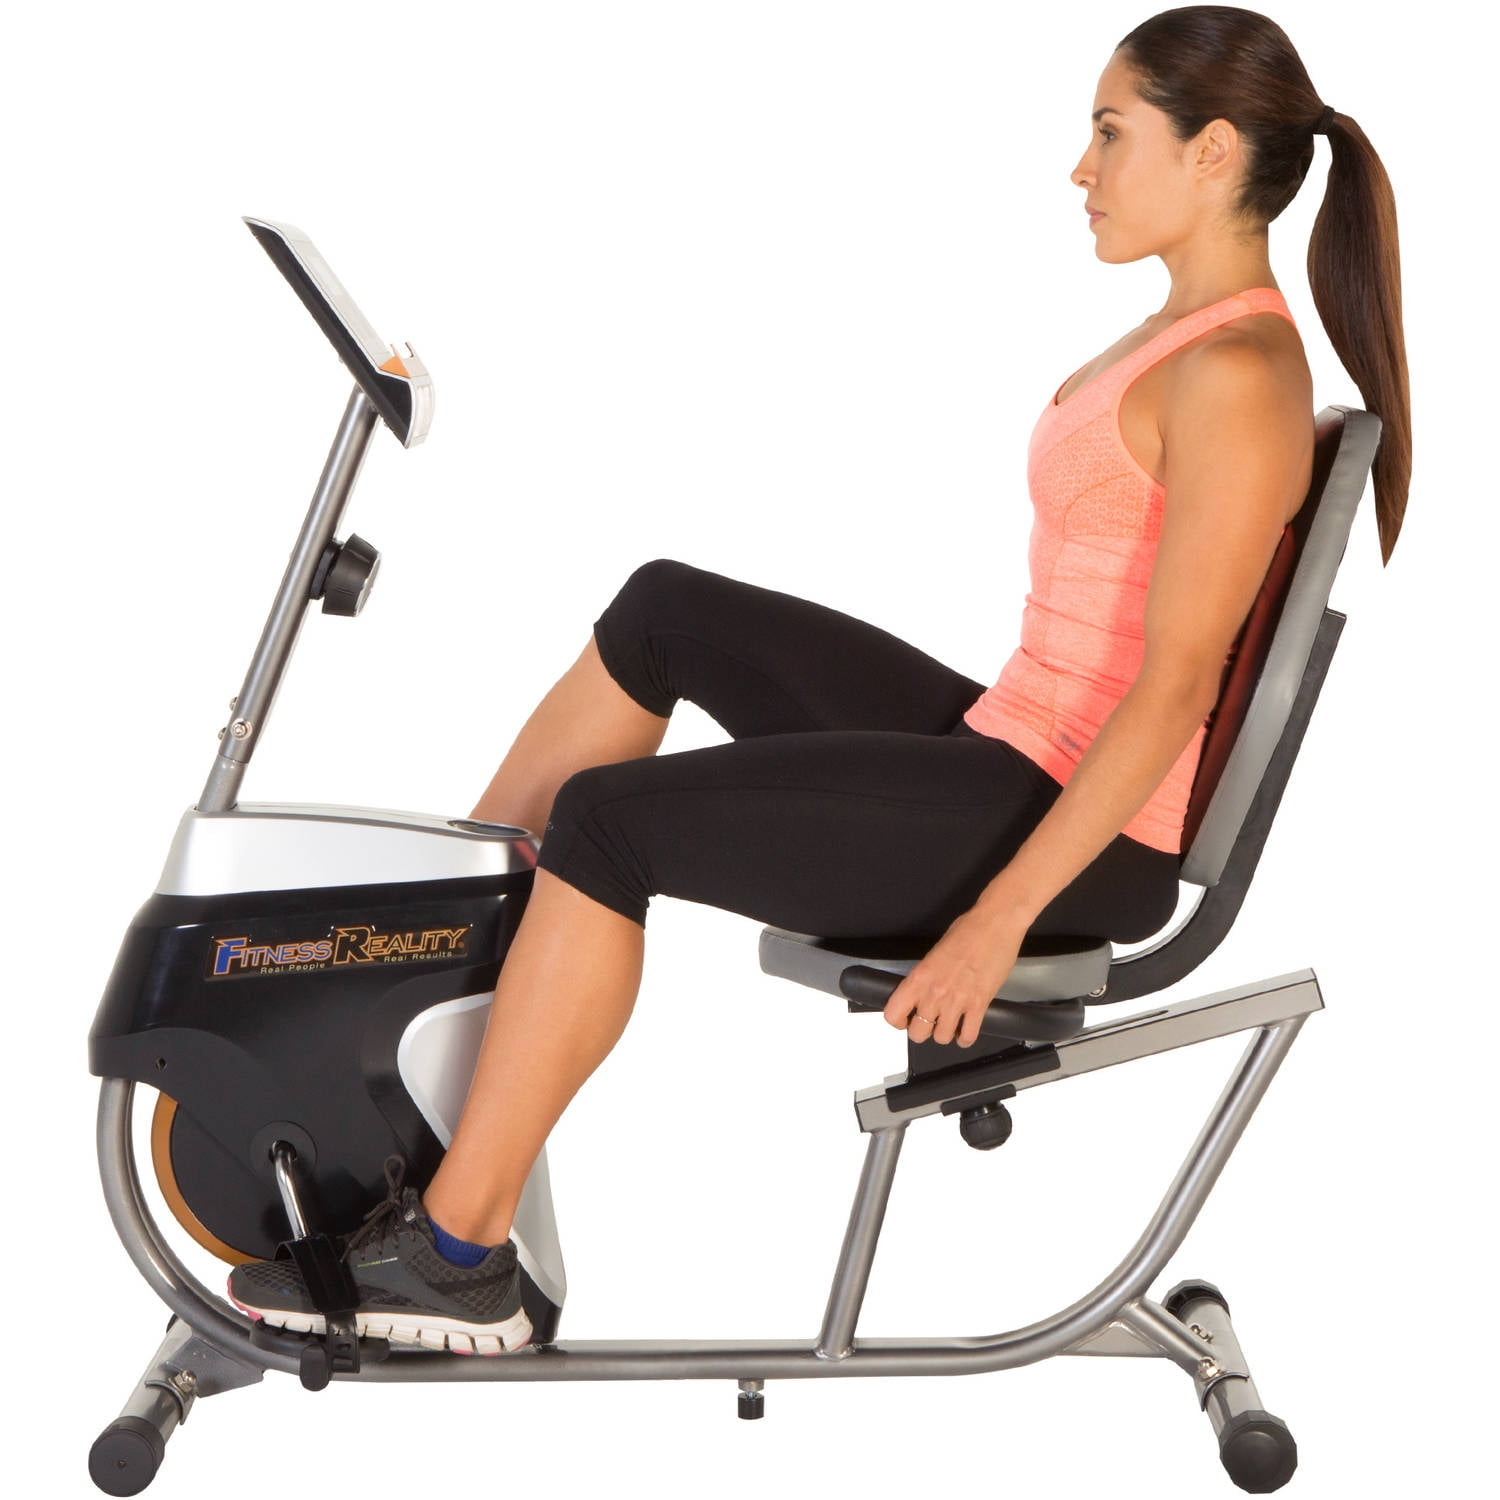 fitness reality r4000 recumbent exercise bike with workout goal setting computer